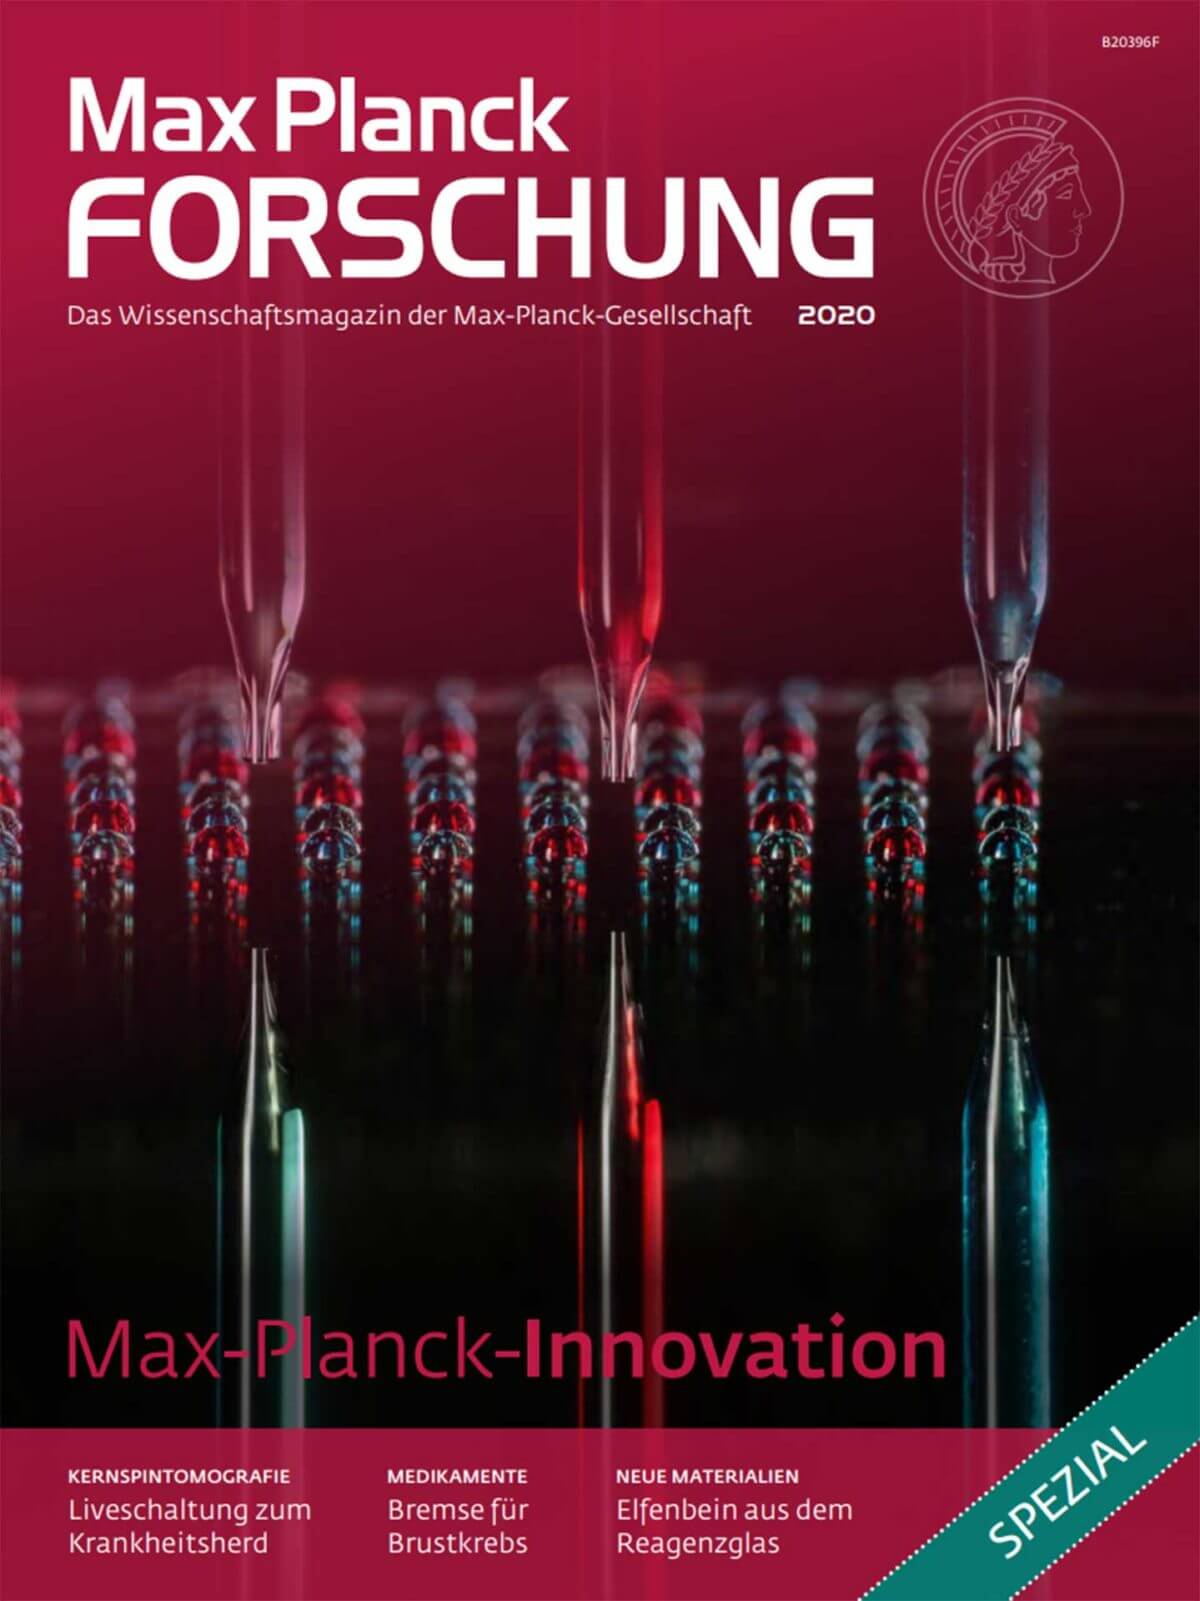 Rows of pipettes and droplets on the title cover of the science journal Max-Planck-Forschung 2020